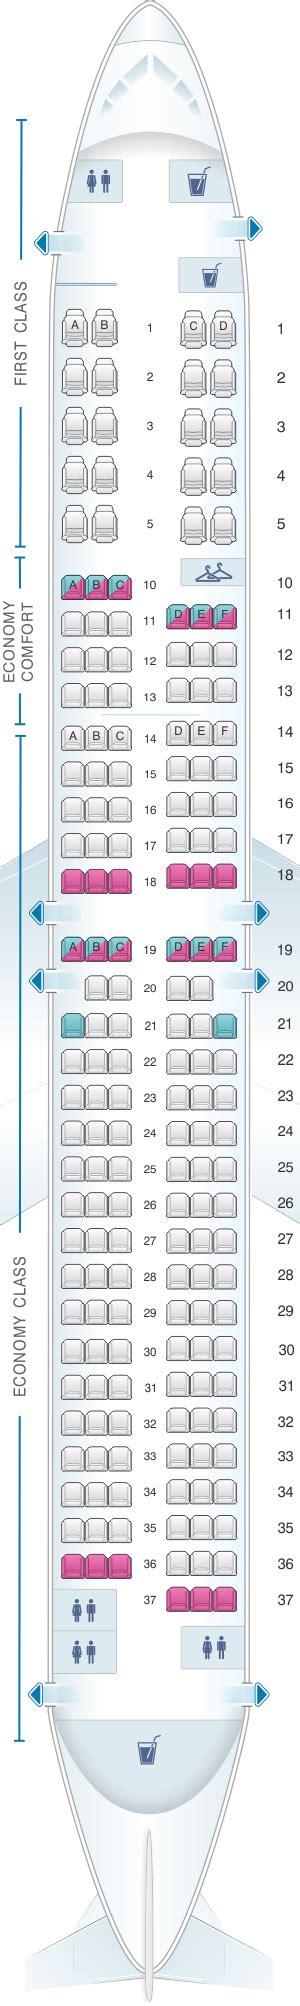 Boeing 737 800 Seating Chart Delta Two Birds Home